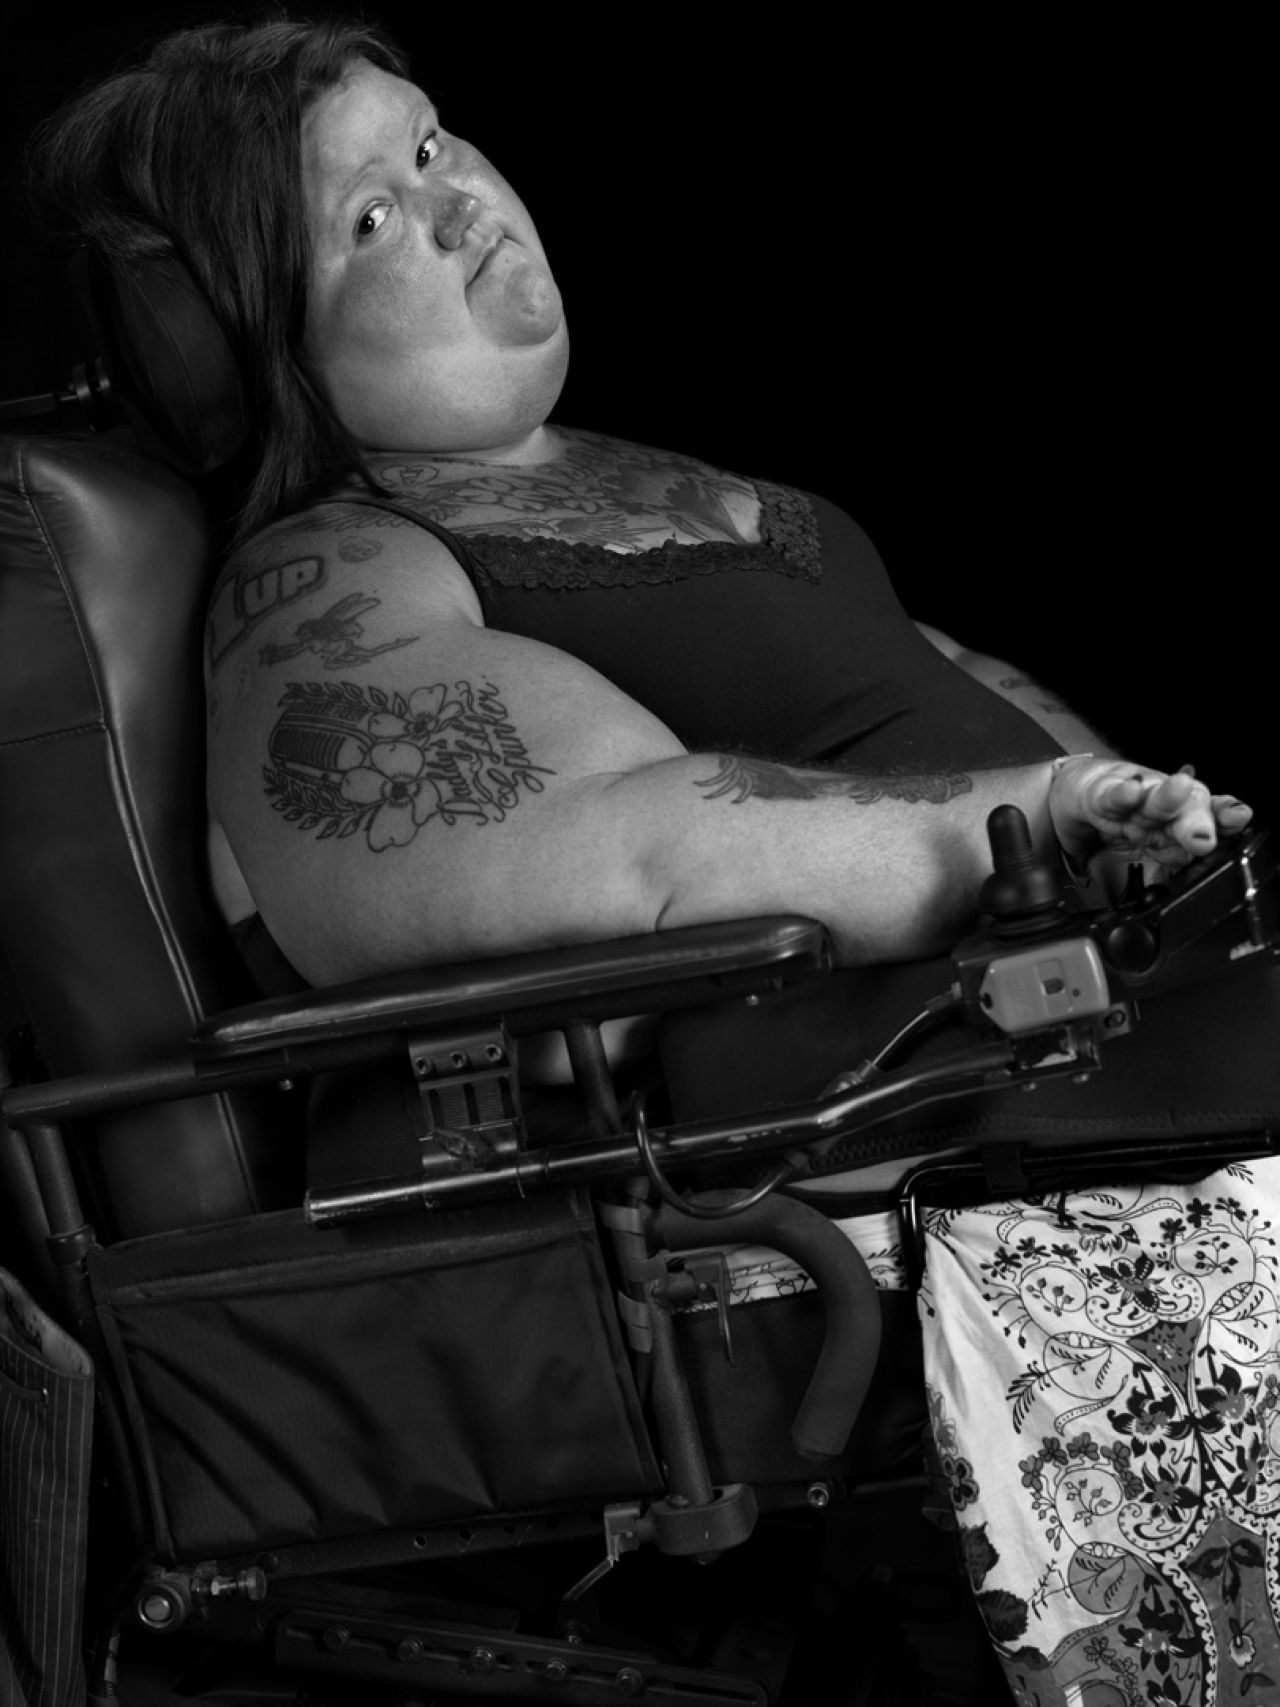 Jessica, an accomplished visual artist, was born with spinal muscular atrophy. She teaches drawing as an adjunct professor at Georgia Perimeter College in Dunwoody. "The greatest obstacles are those I set for myself," she says. "I define my strength daily by living for the moments of triumph where the label of 'weak' is obsolete."  